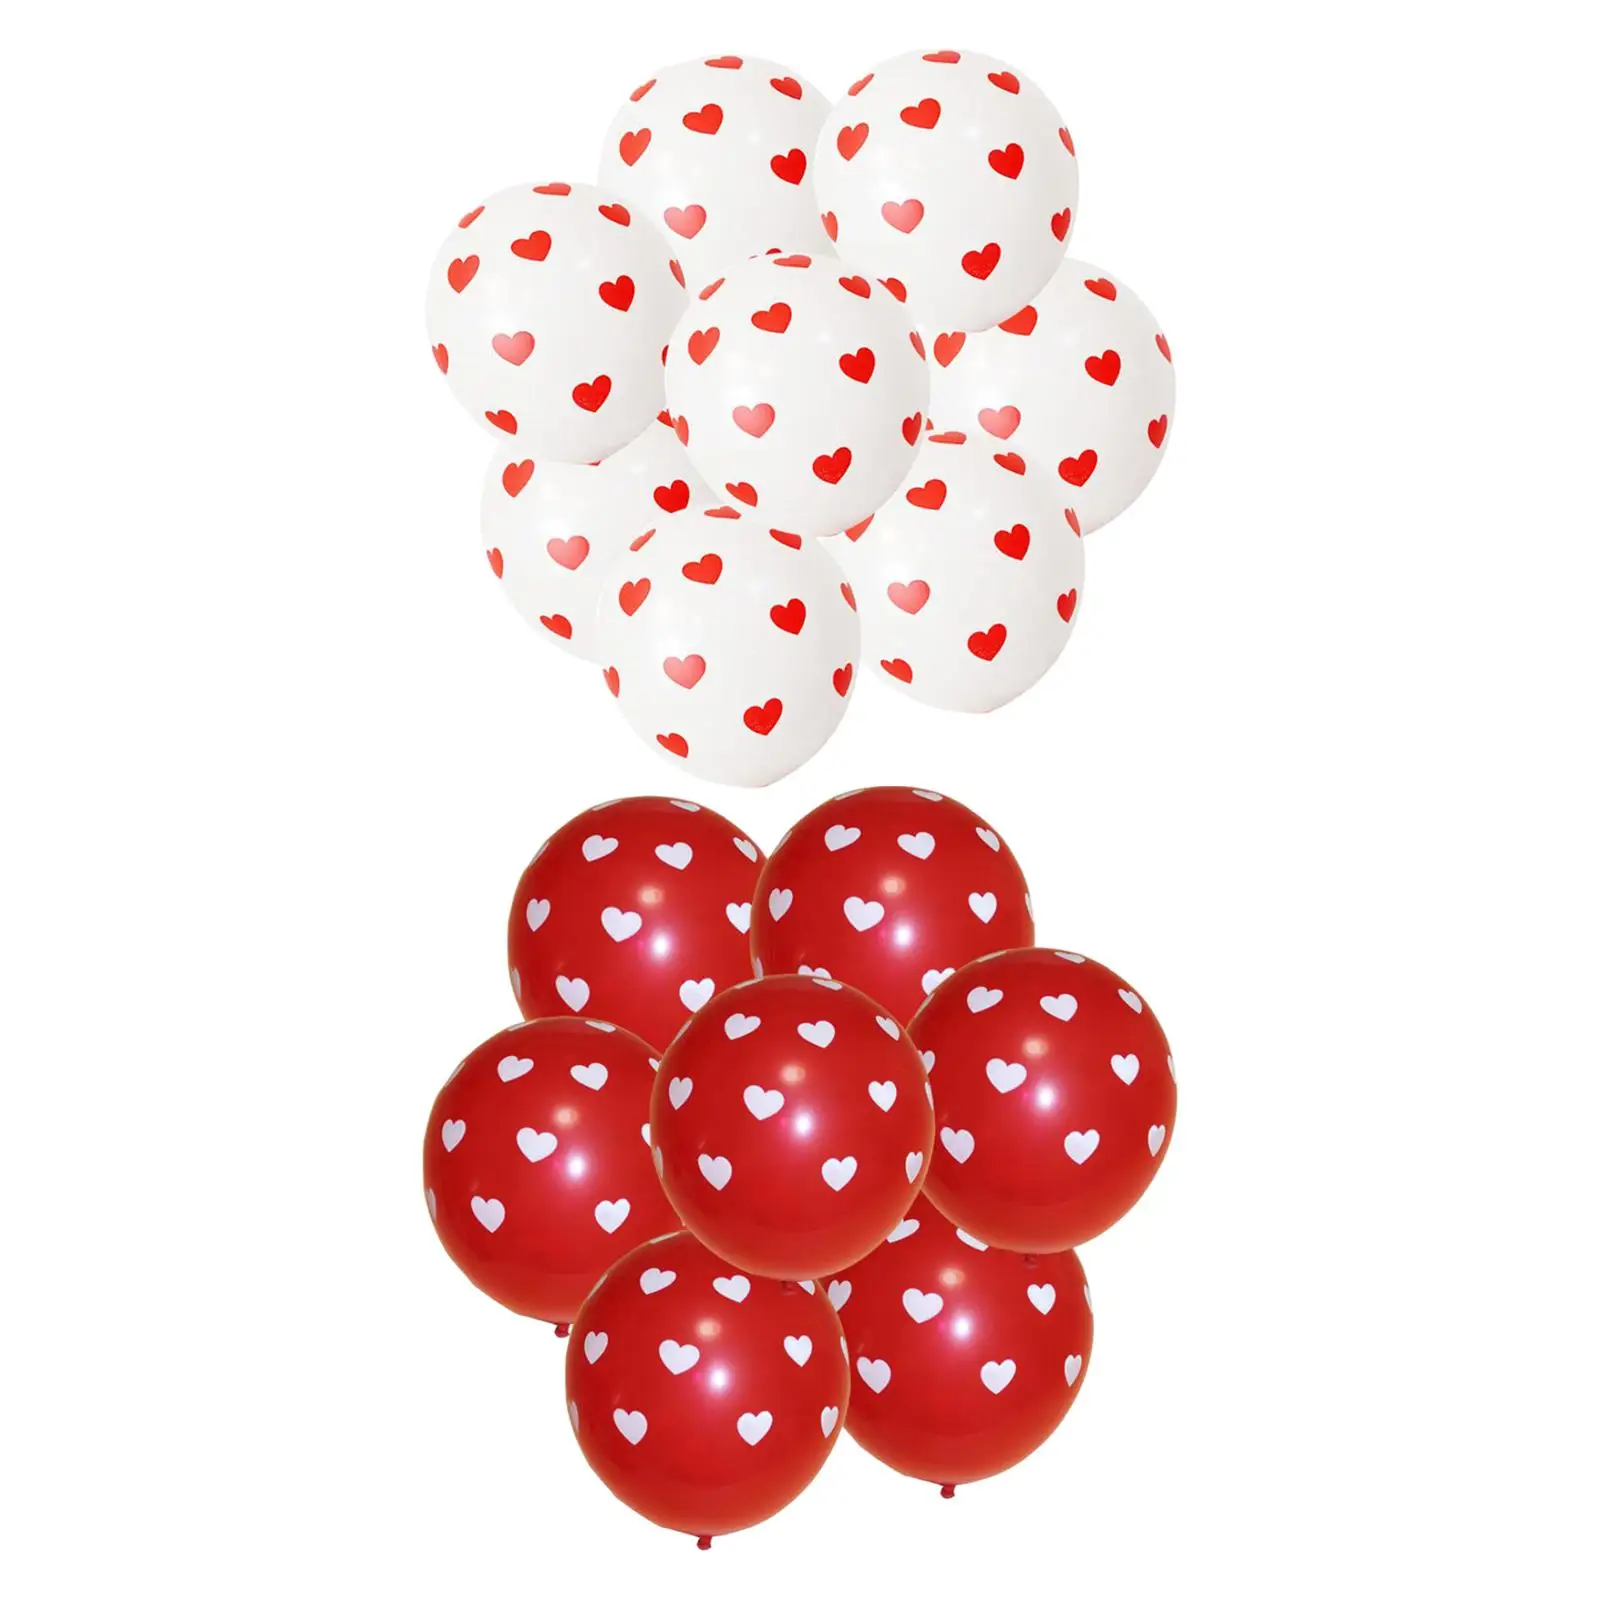 50Pcs Valentine`s Day Balloons Photo Props DIY Heart Balloons for Holiday Celebrations Engagement Anniversary Valentines Day